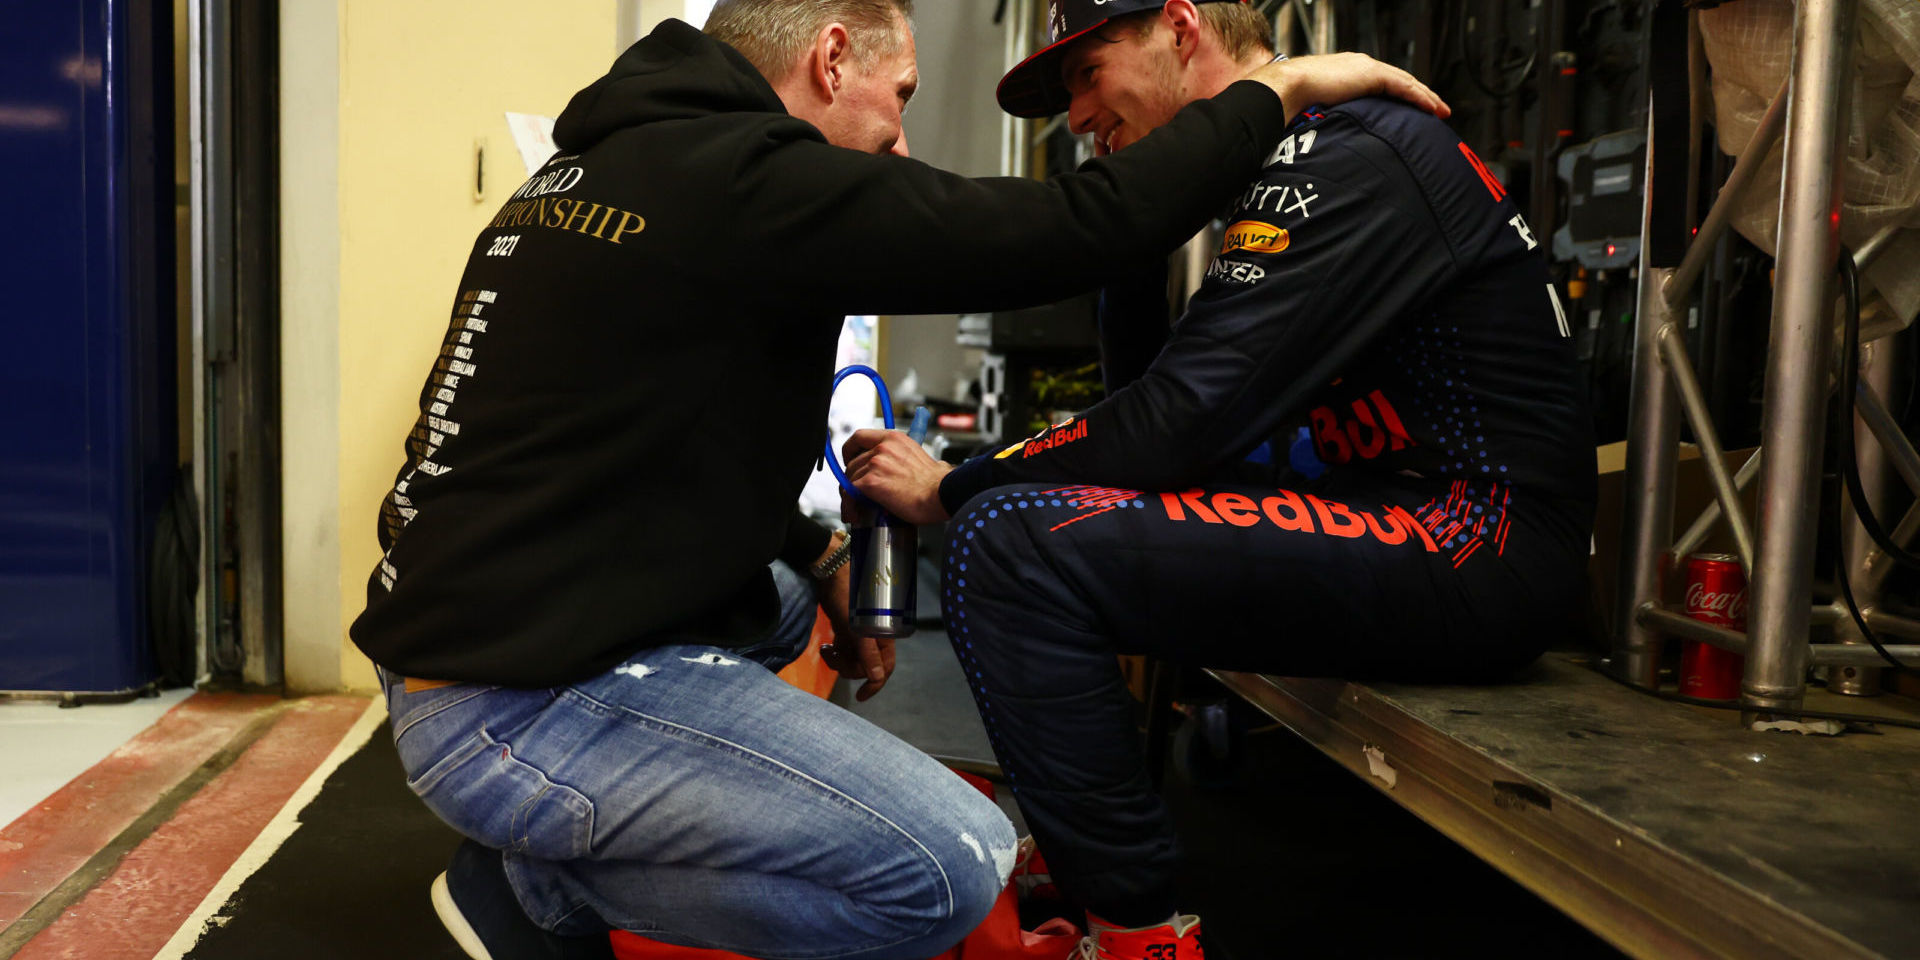 ABU DHABI, UNITED ARAB EMIRATES - DECEMBER 12: Race winner and 2021 F1 World Drivers Champion Max Verstappen of Netherlands and Red Bull Racing celebrates with his father Jos Verstappen in parc ferme during the F1 Grand Prix of Abu Dhabi at Yas Marina Circuit on December 12, 2021 in Abu Dhabi, United Arab Emirates. (Photo by Mark Thompson/Getty Images) // Getty Images / Red Bull Content Pool // SI202112120386 // Usage for editorial use only //